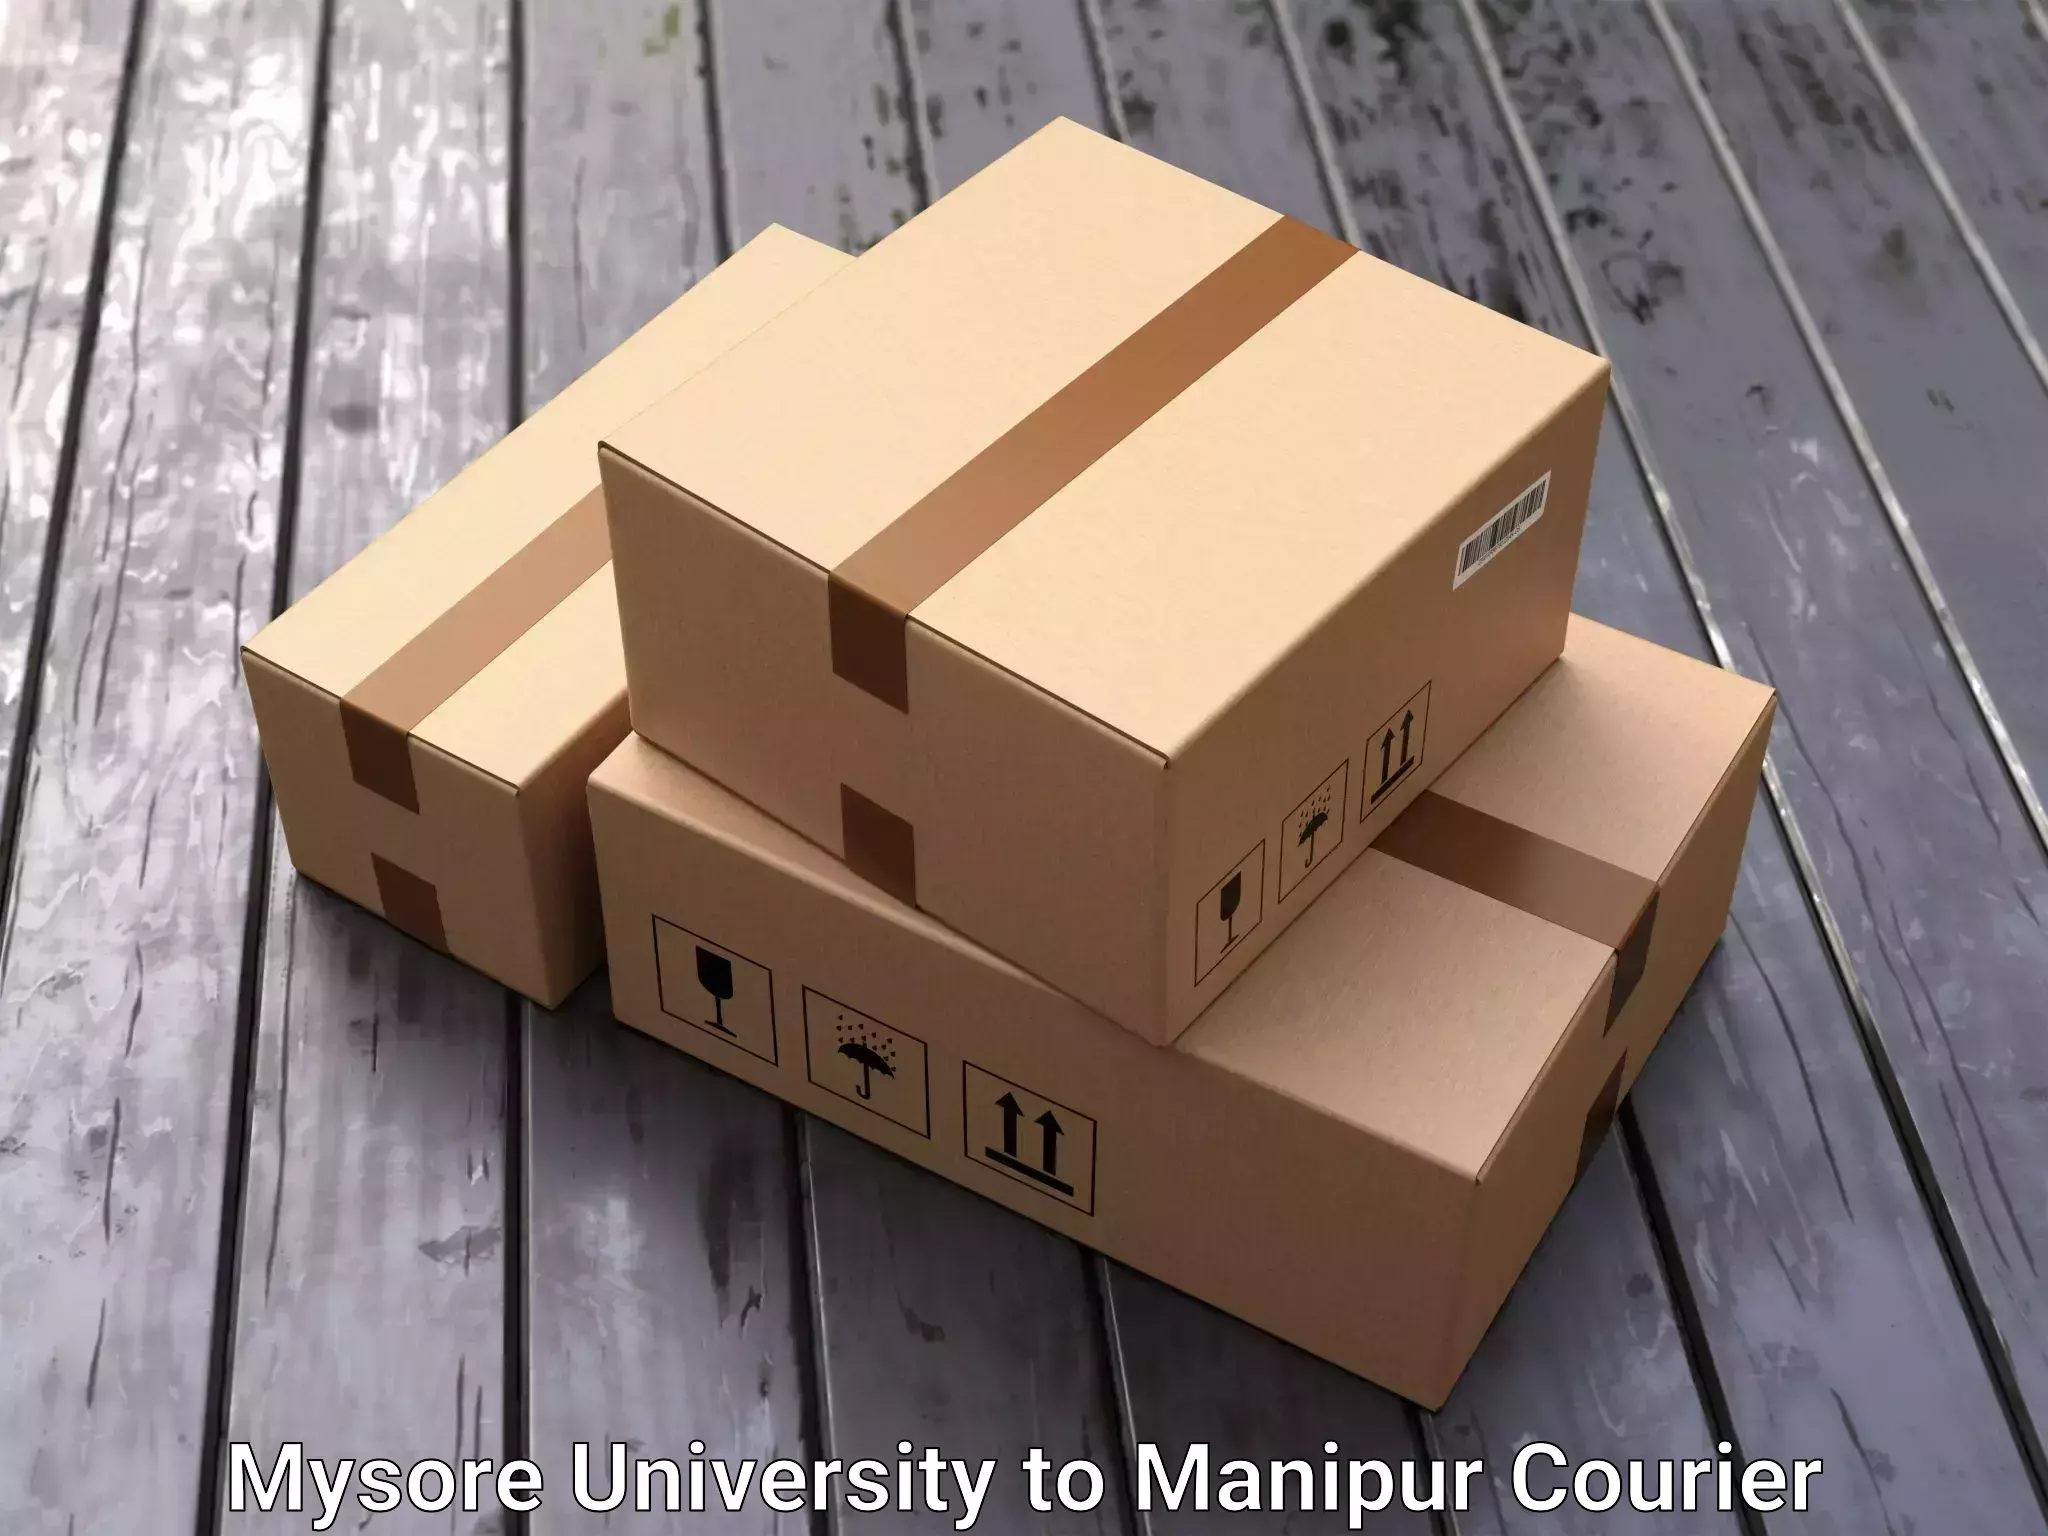 Dependable moving services Mysore University to Manipur